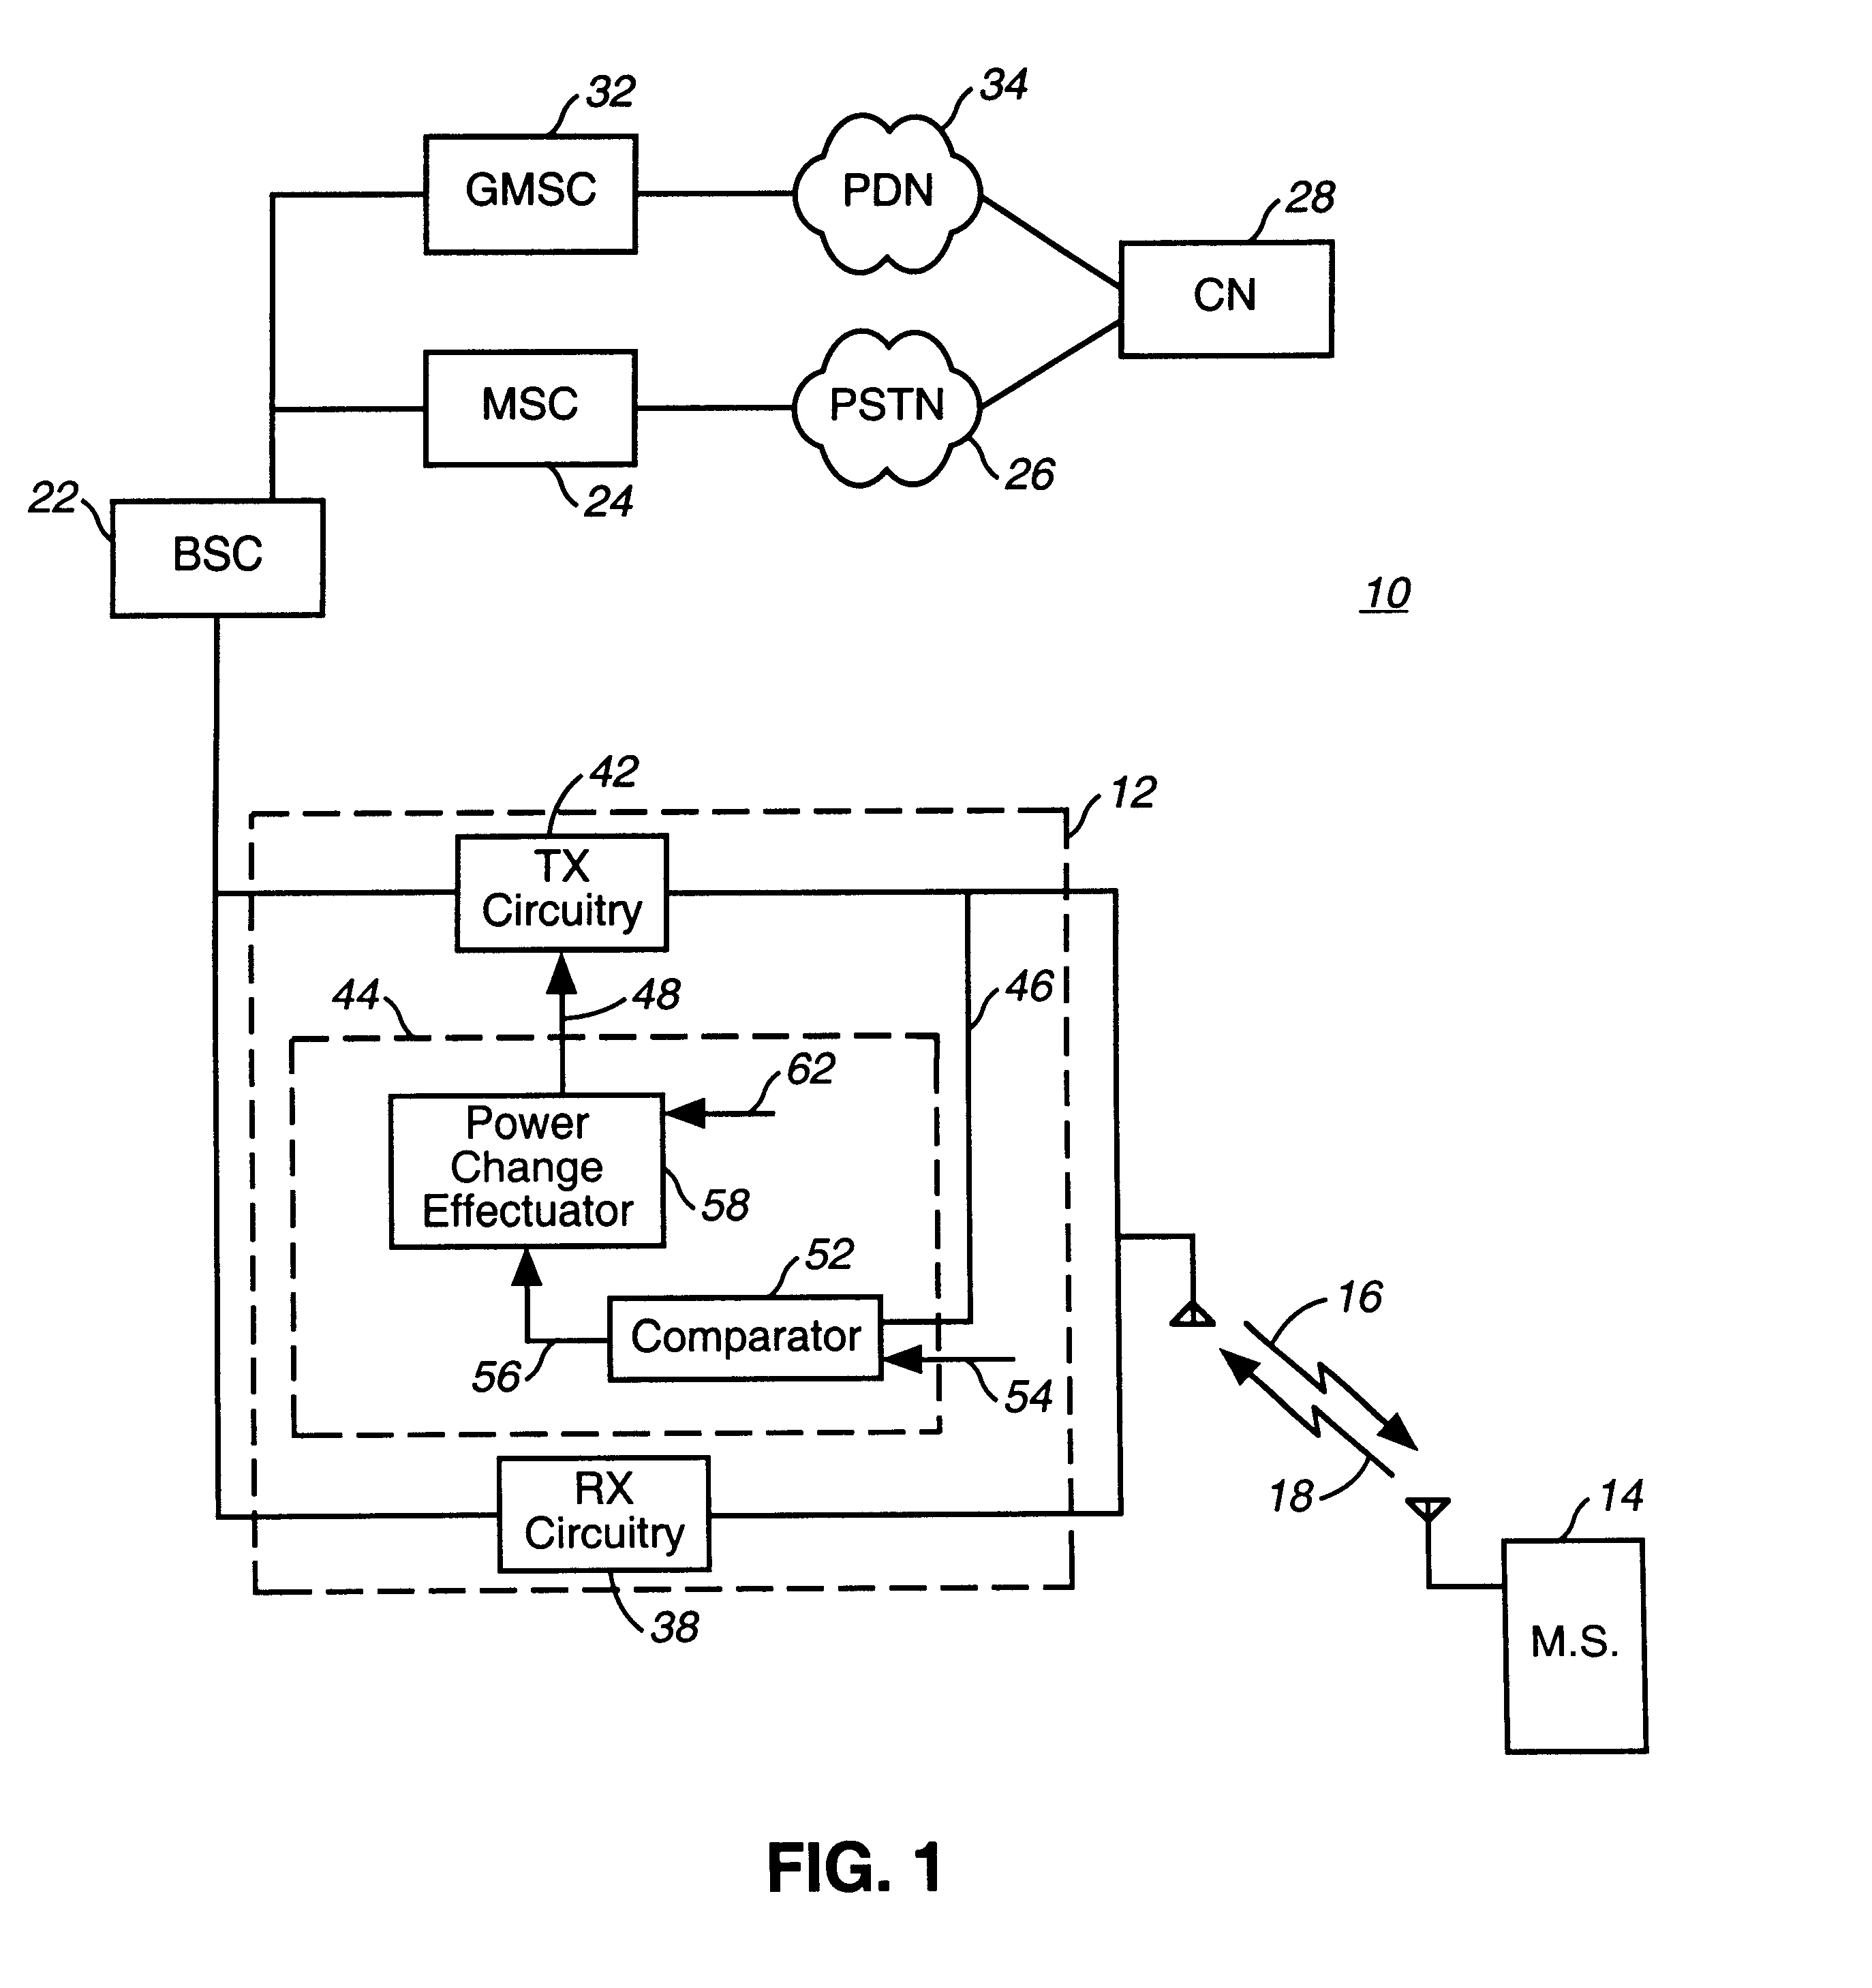 Power control apparatus, and associated method, for a sending station of a communication system